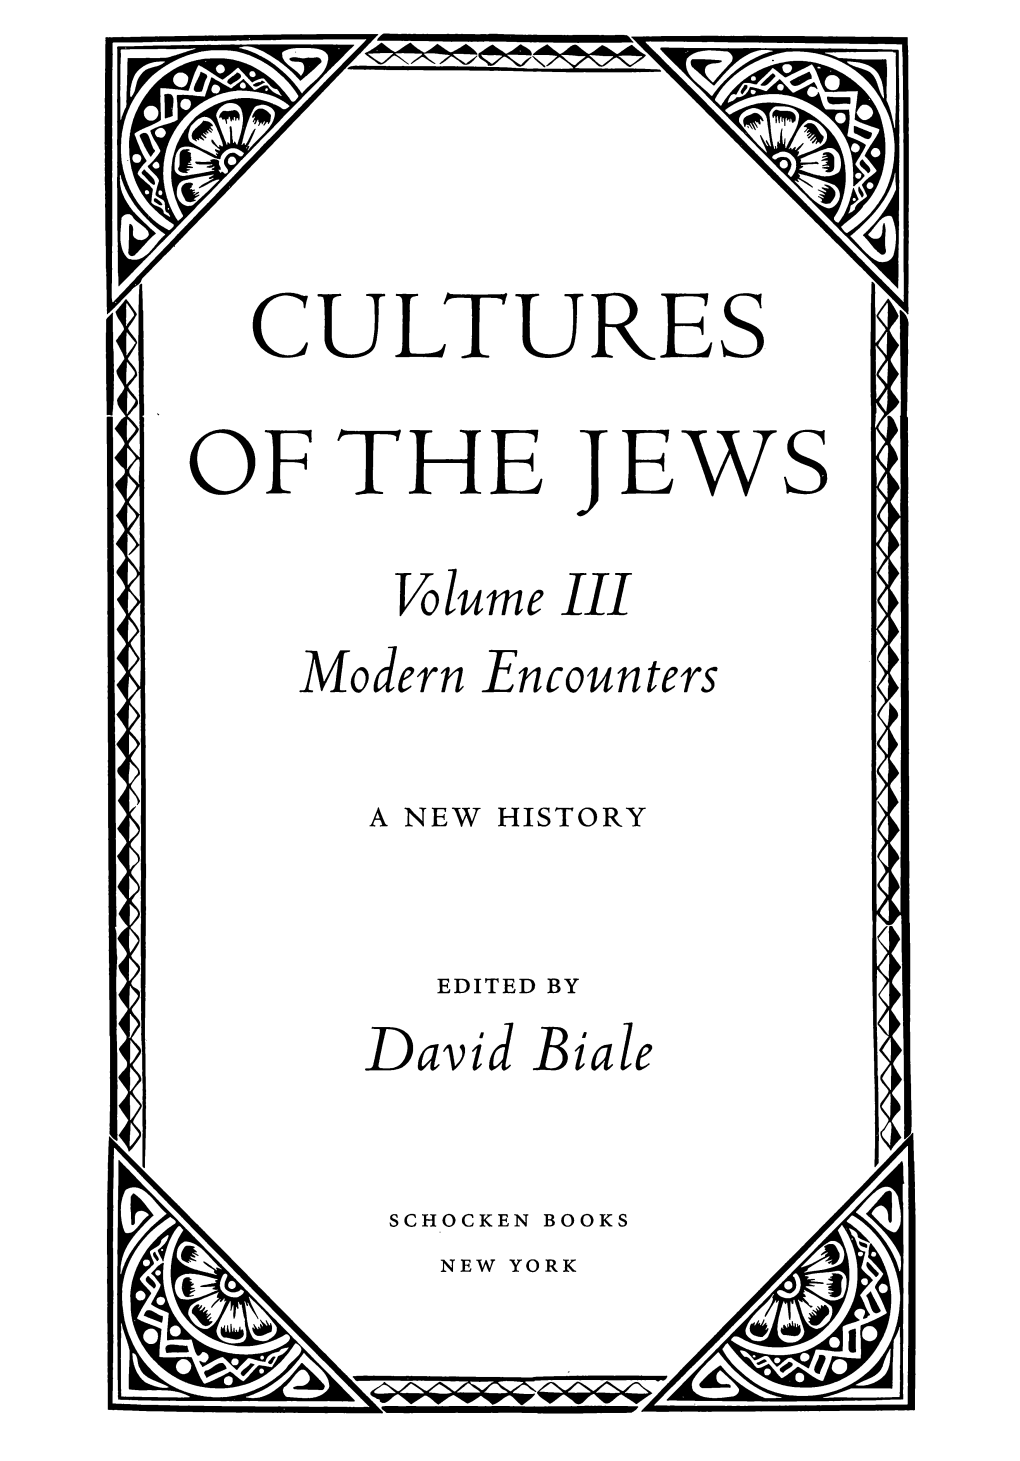 CULTURES of the JEWS Volume III Modern Encounters